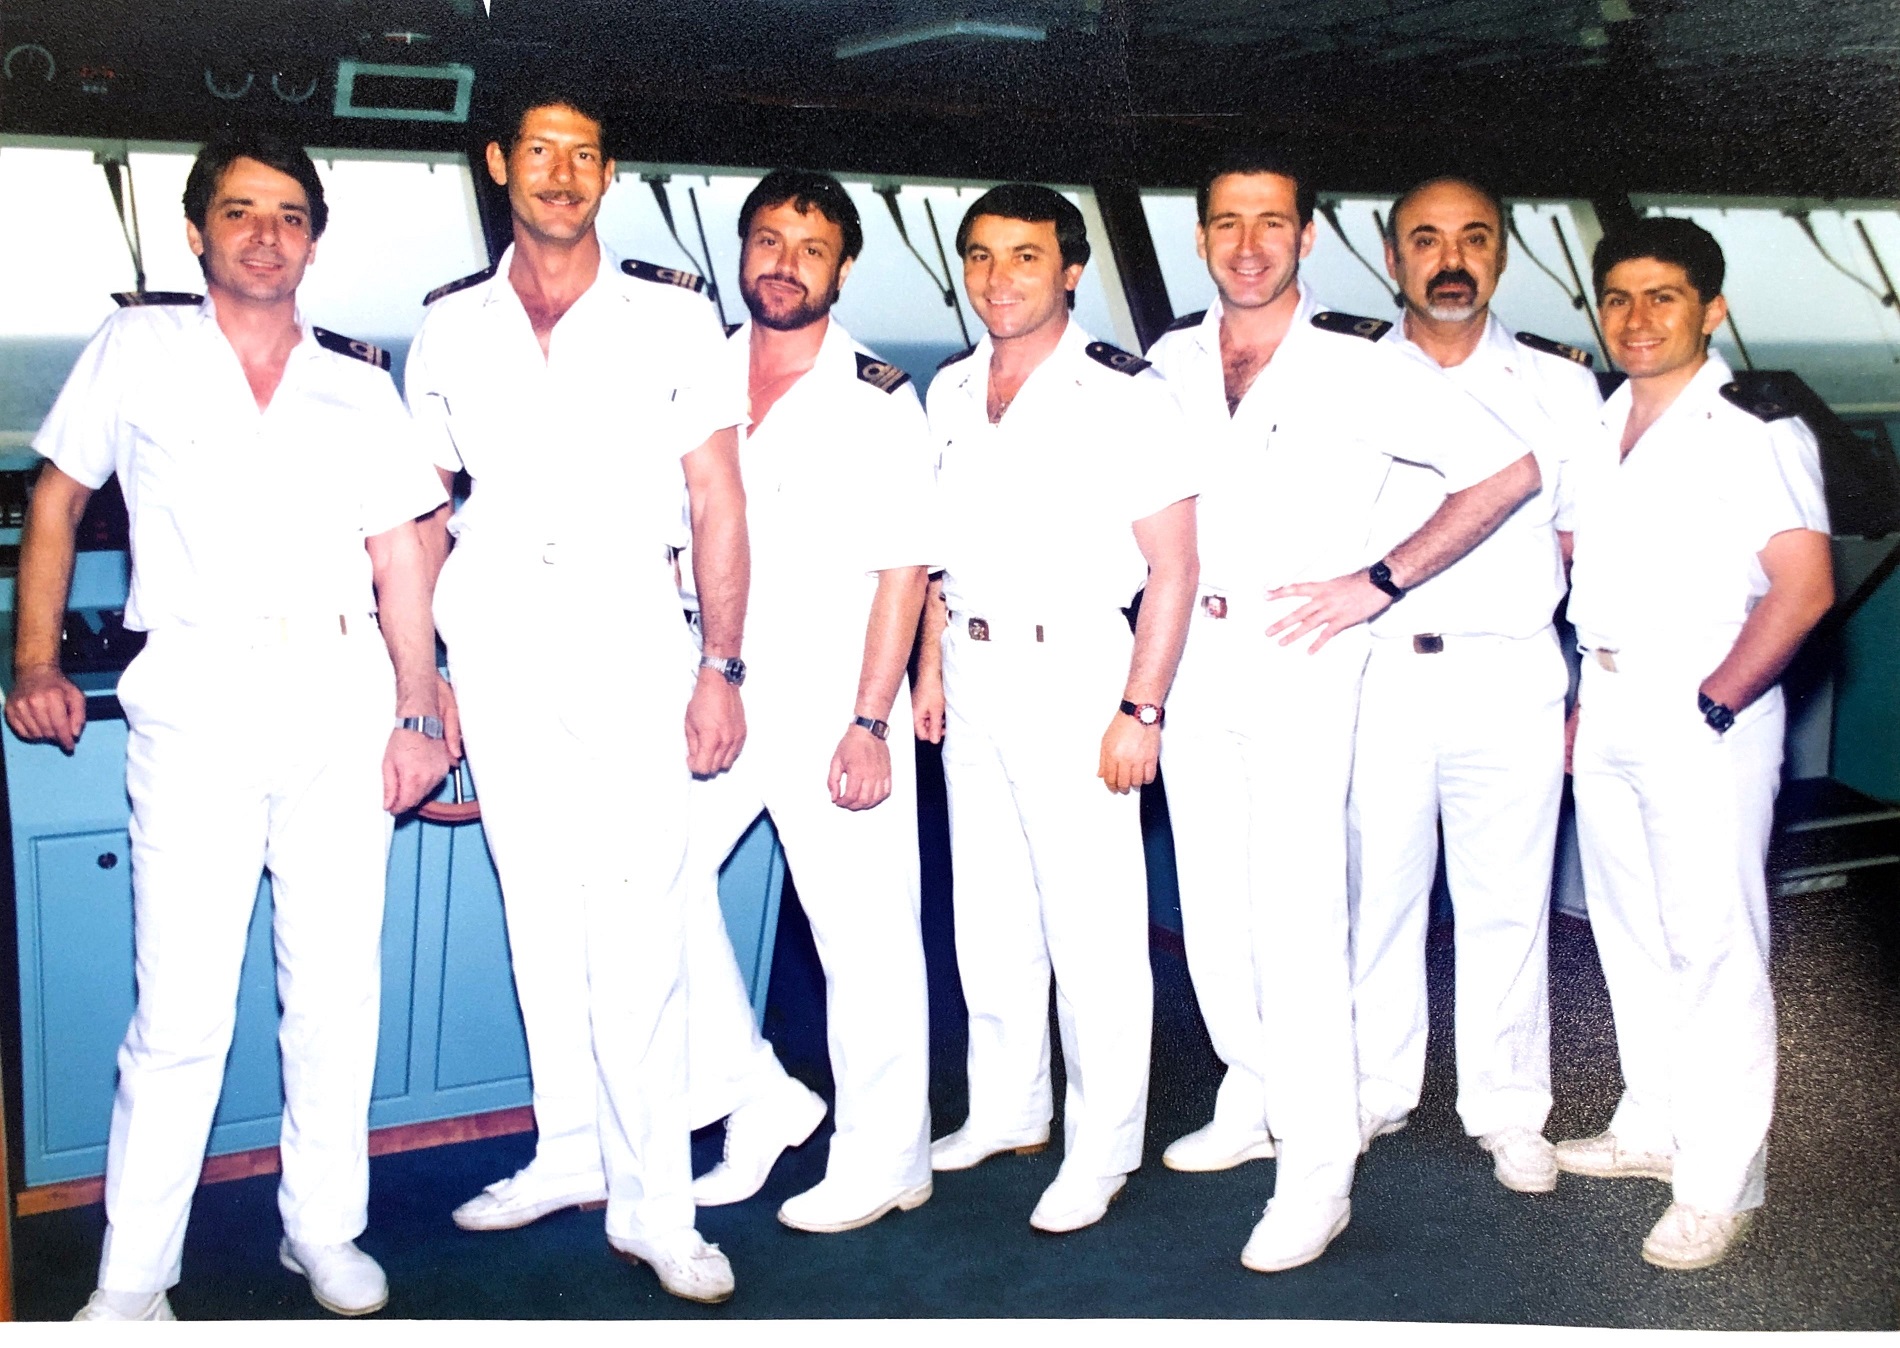 Carnival Fantasy’s officers, including eventual Captains Alessandro Galotto (second from left) and Gaetano Gigliotti (third from right) are shown here on the ship’s navigational bridge during start-up.